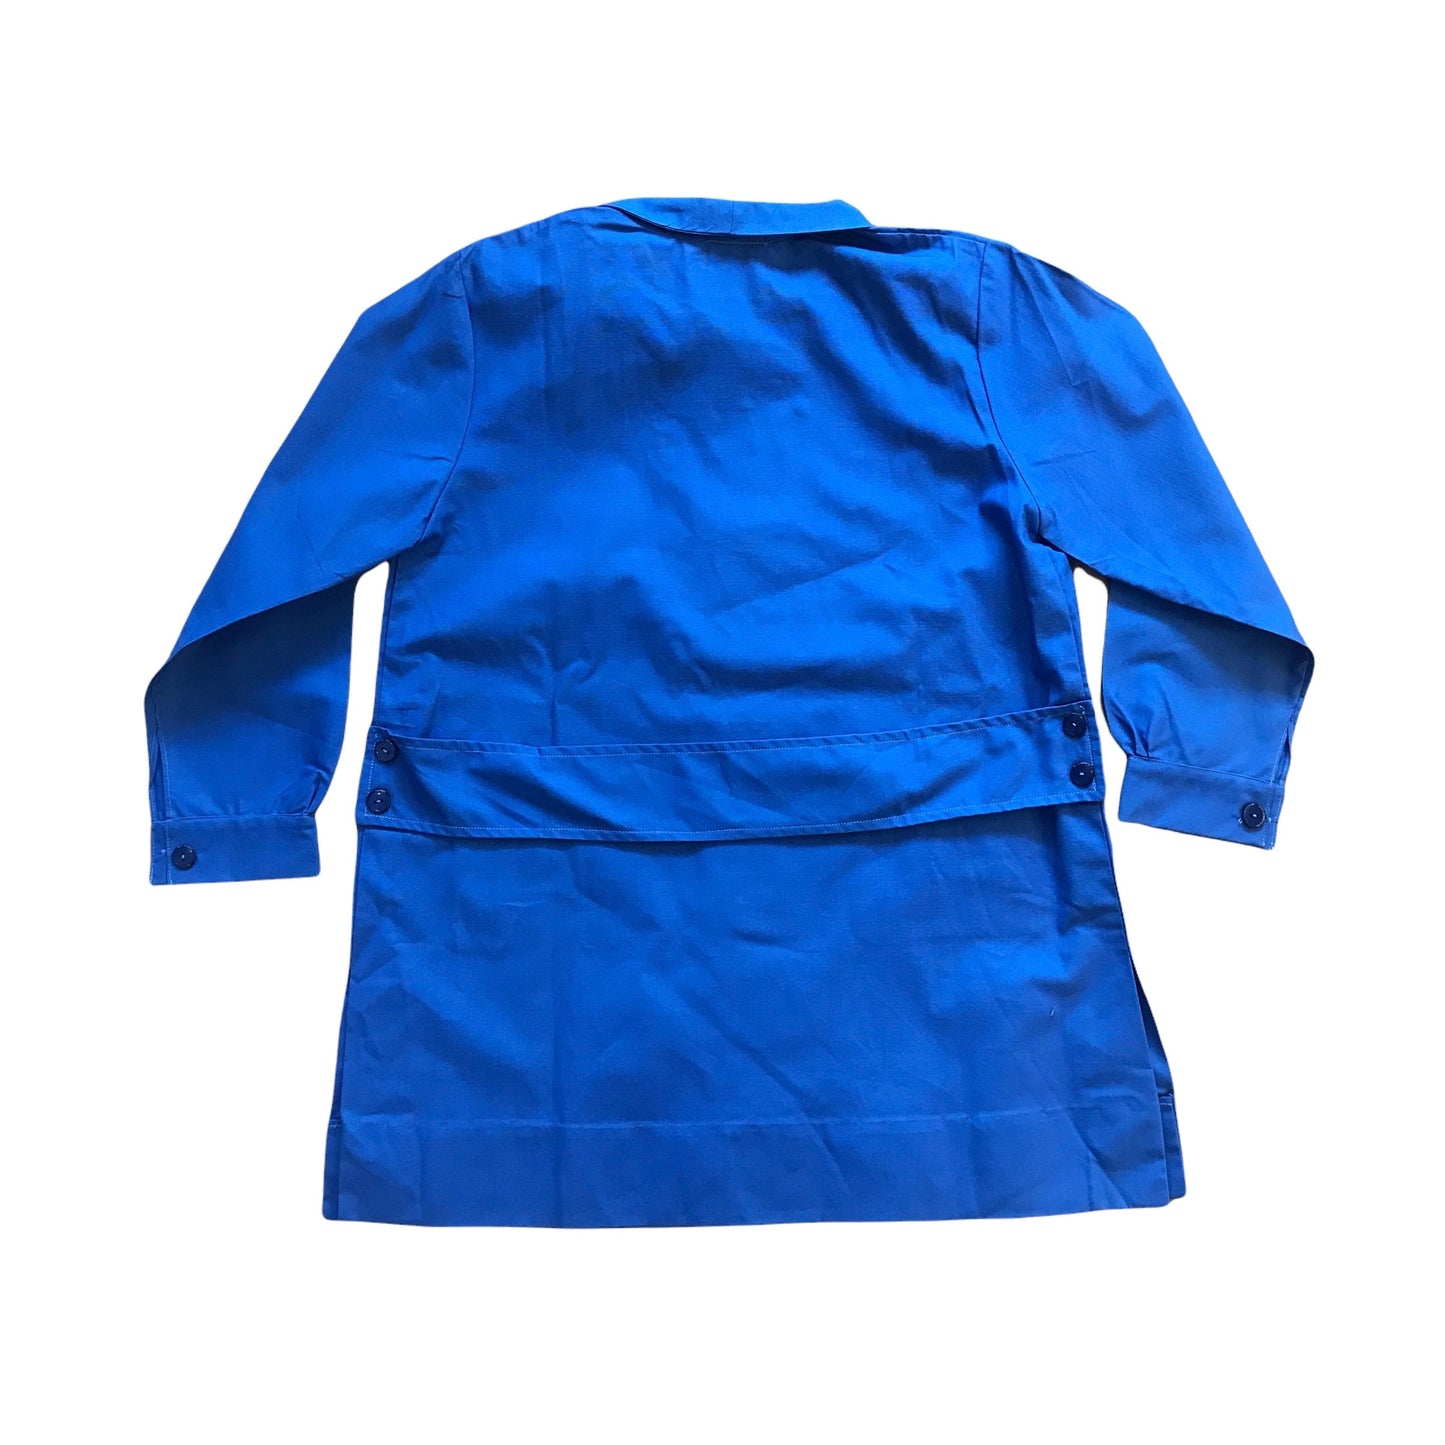 French Vintage 1960's Blue School Blouse /  5-6 Years